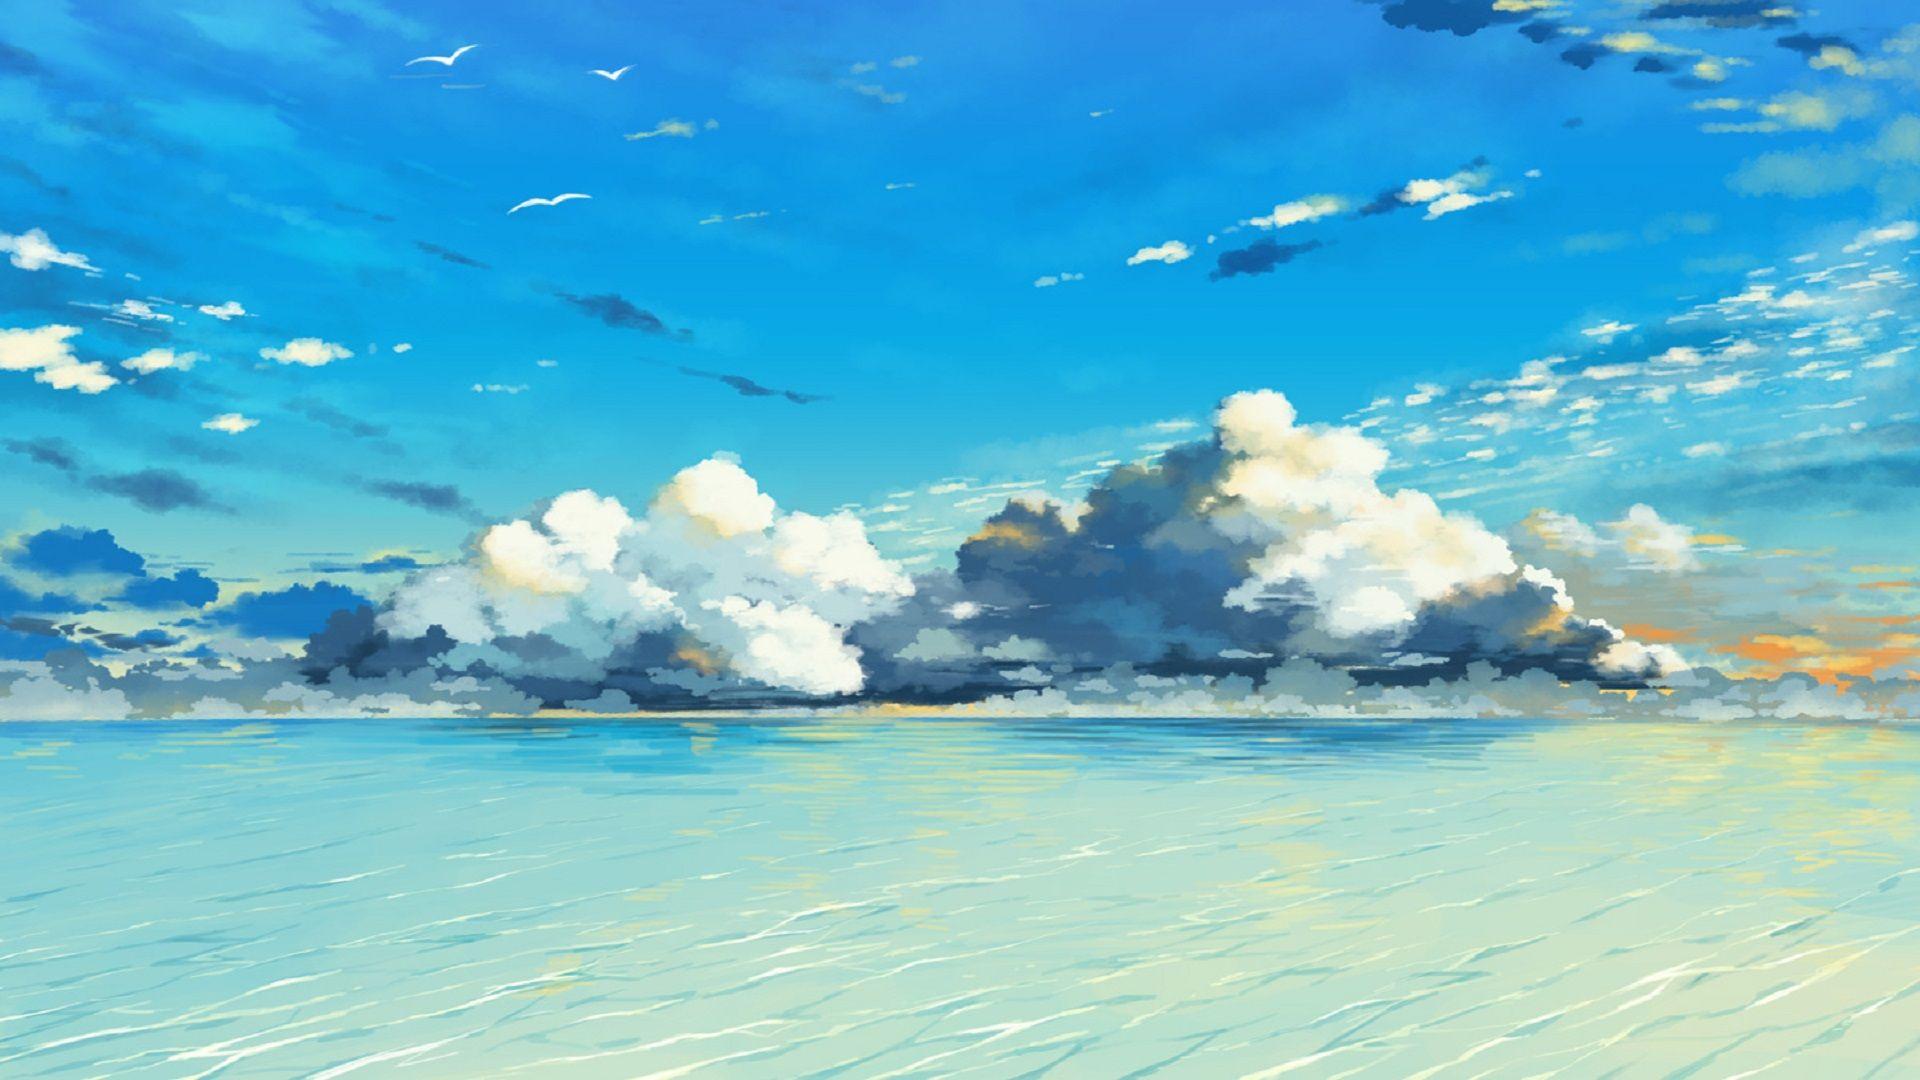 Ocean and clouds anime, manga scenery. 4K drawing of a cloudscape,  landscape. Colorful pink blue sea with cloud at dusk or dawn. Perfect  wallpaper or background. Cartoon like painting. Stock Illustration |